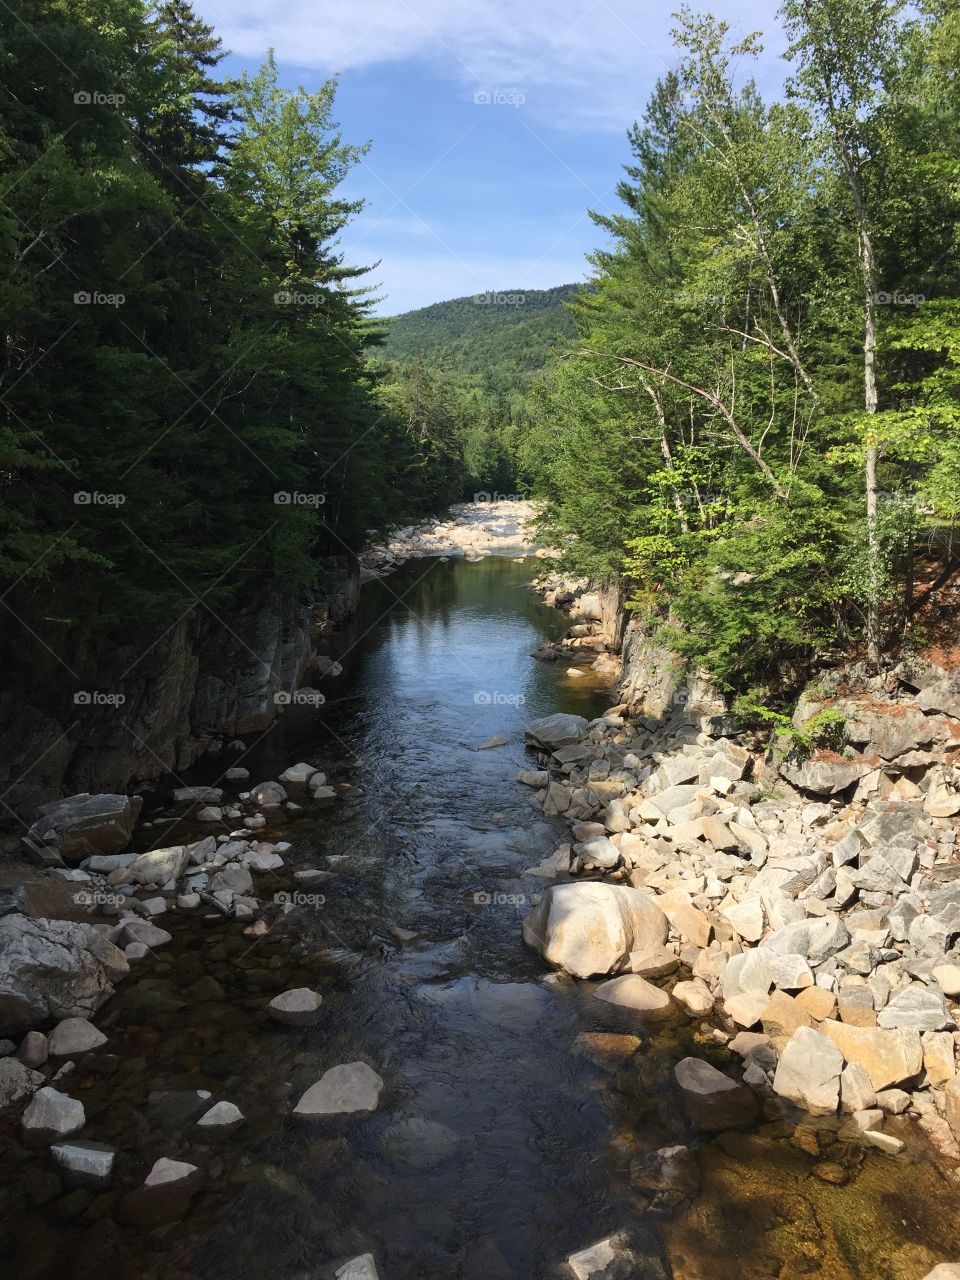 Rock lined mountain stream in white mountains of New Hampshire